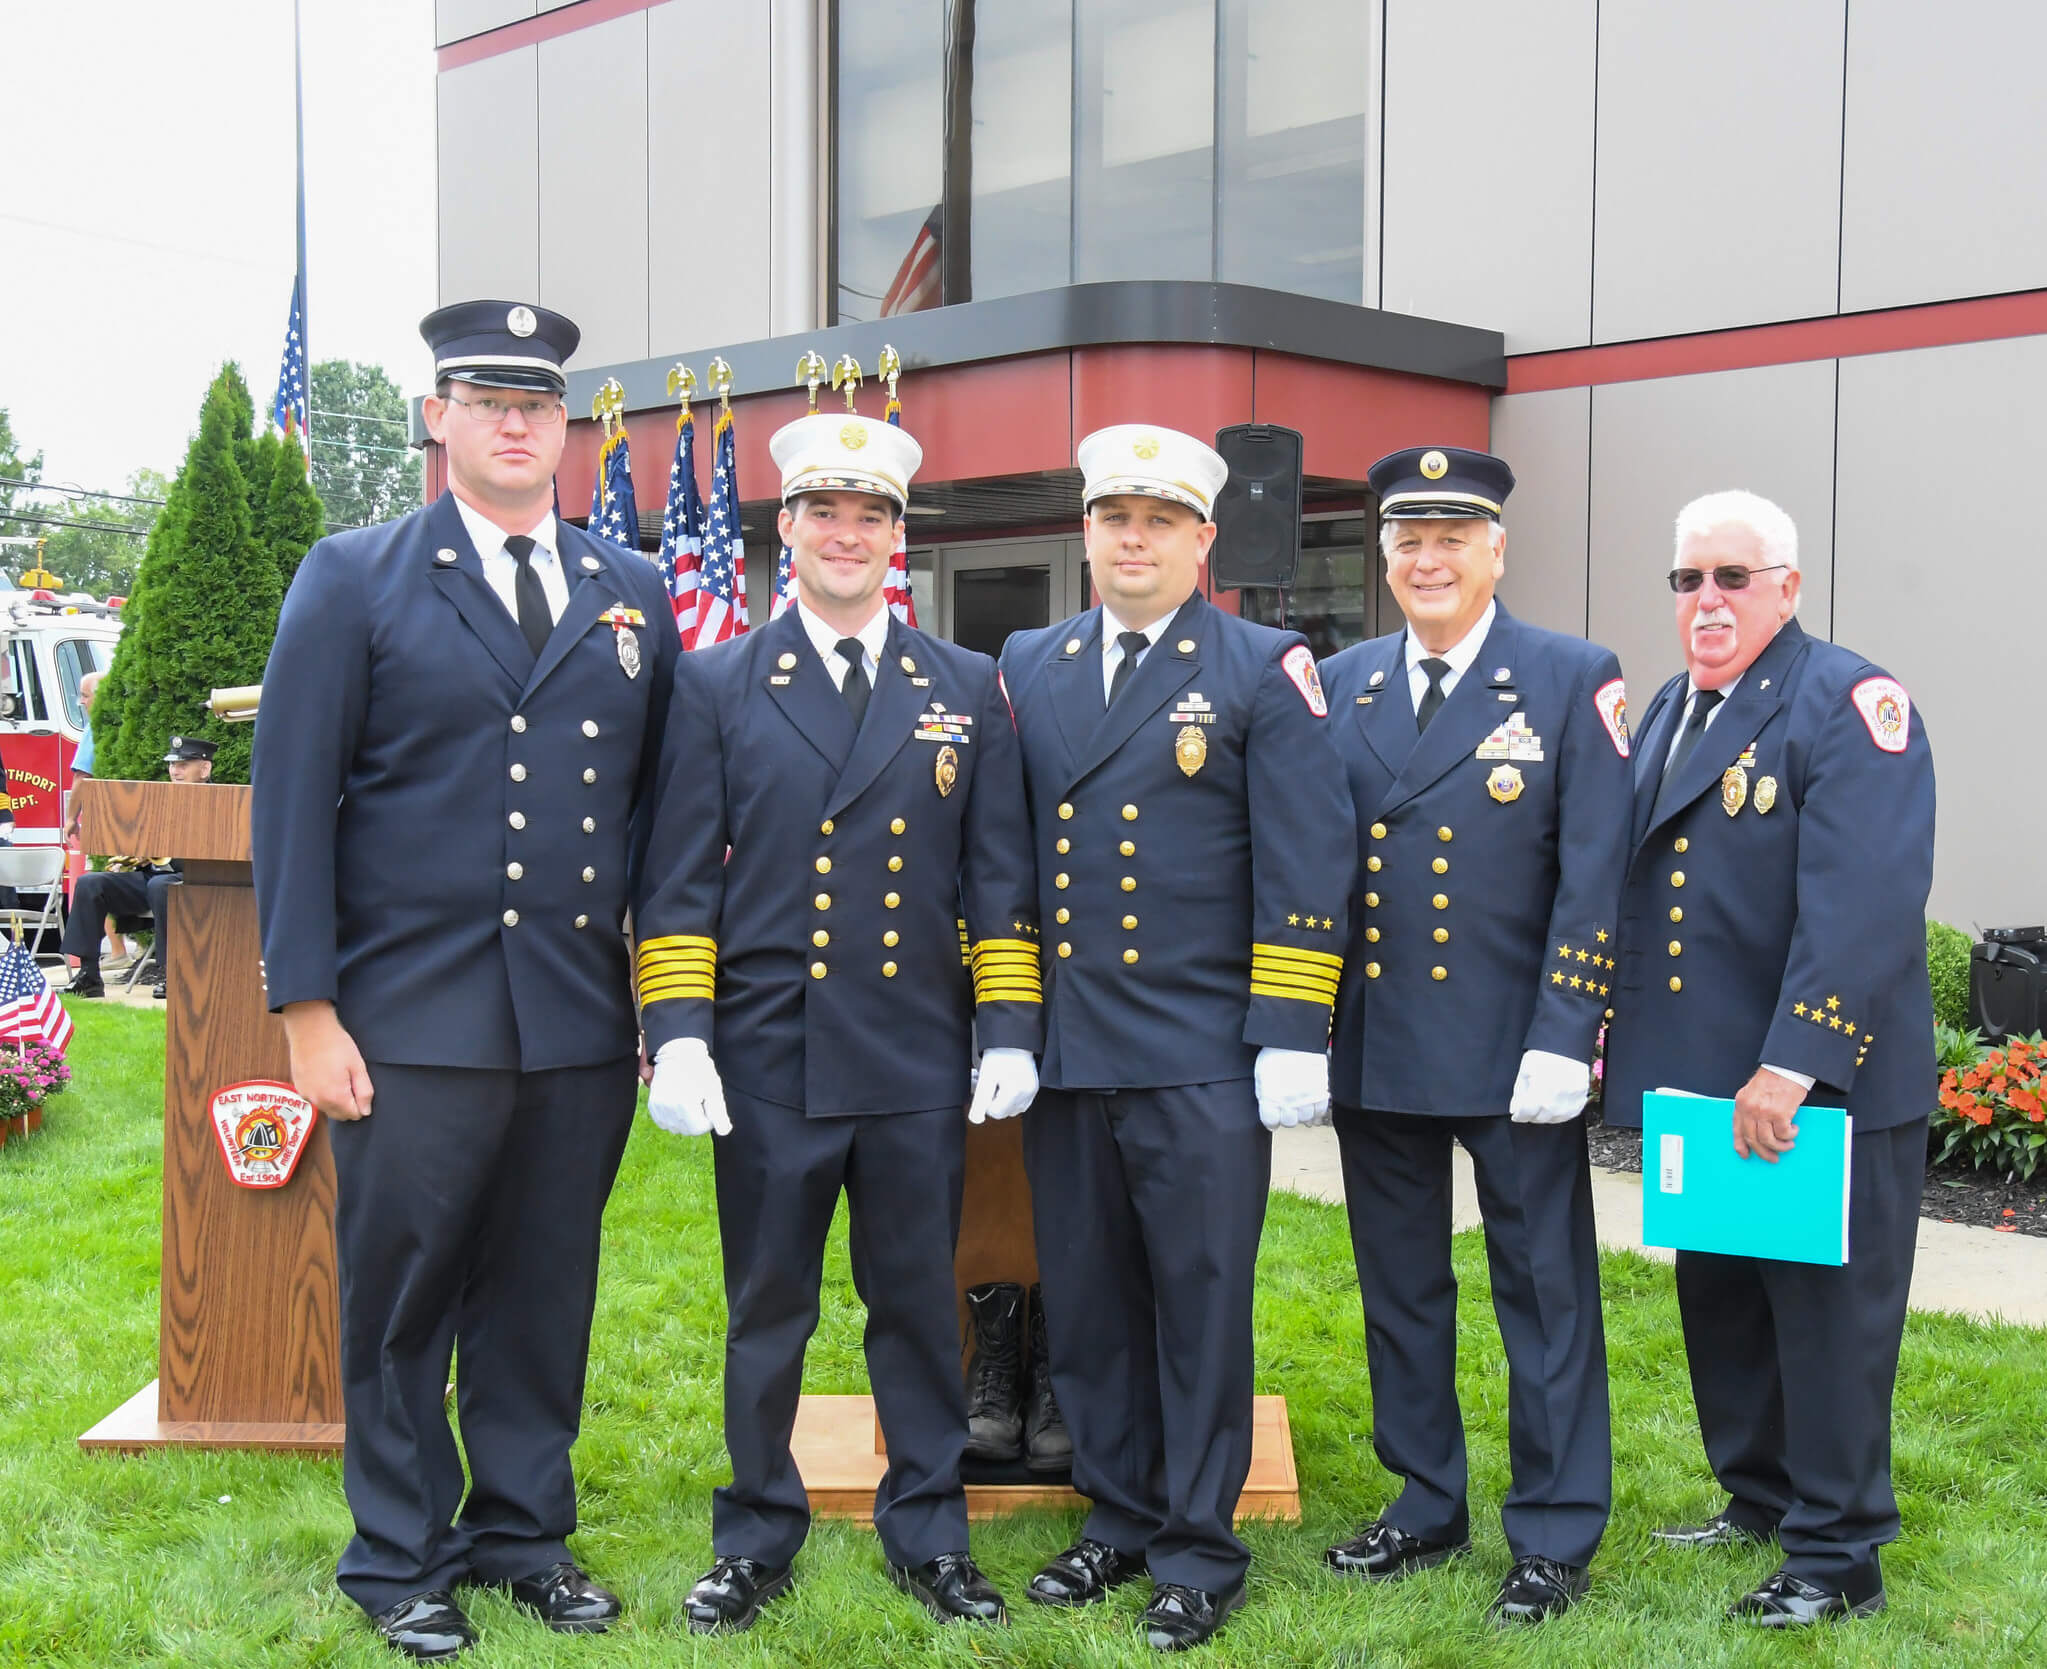 Image 18 East Northport Fire Department 9 11 memorial